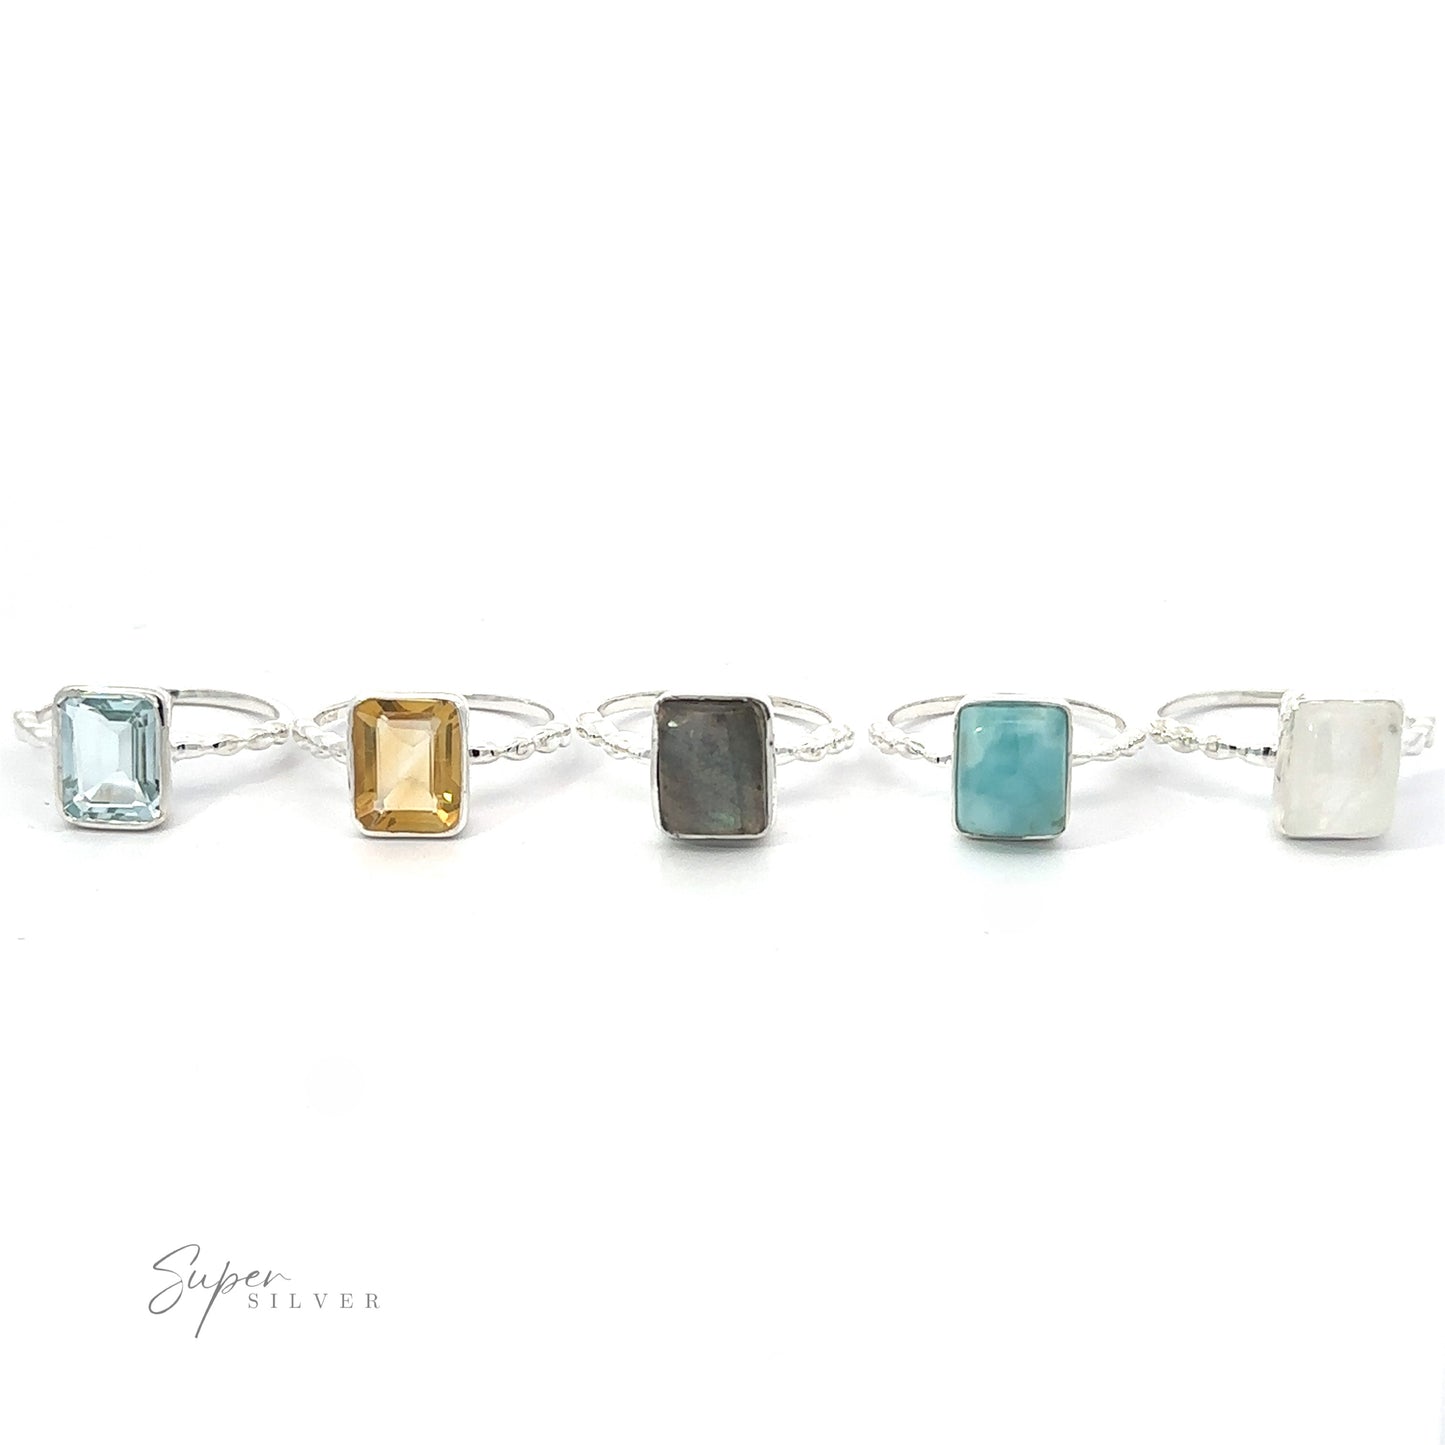 Five Rectangle Gemstone Rings with Beaded Bands in a row against a white background.